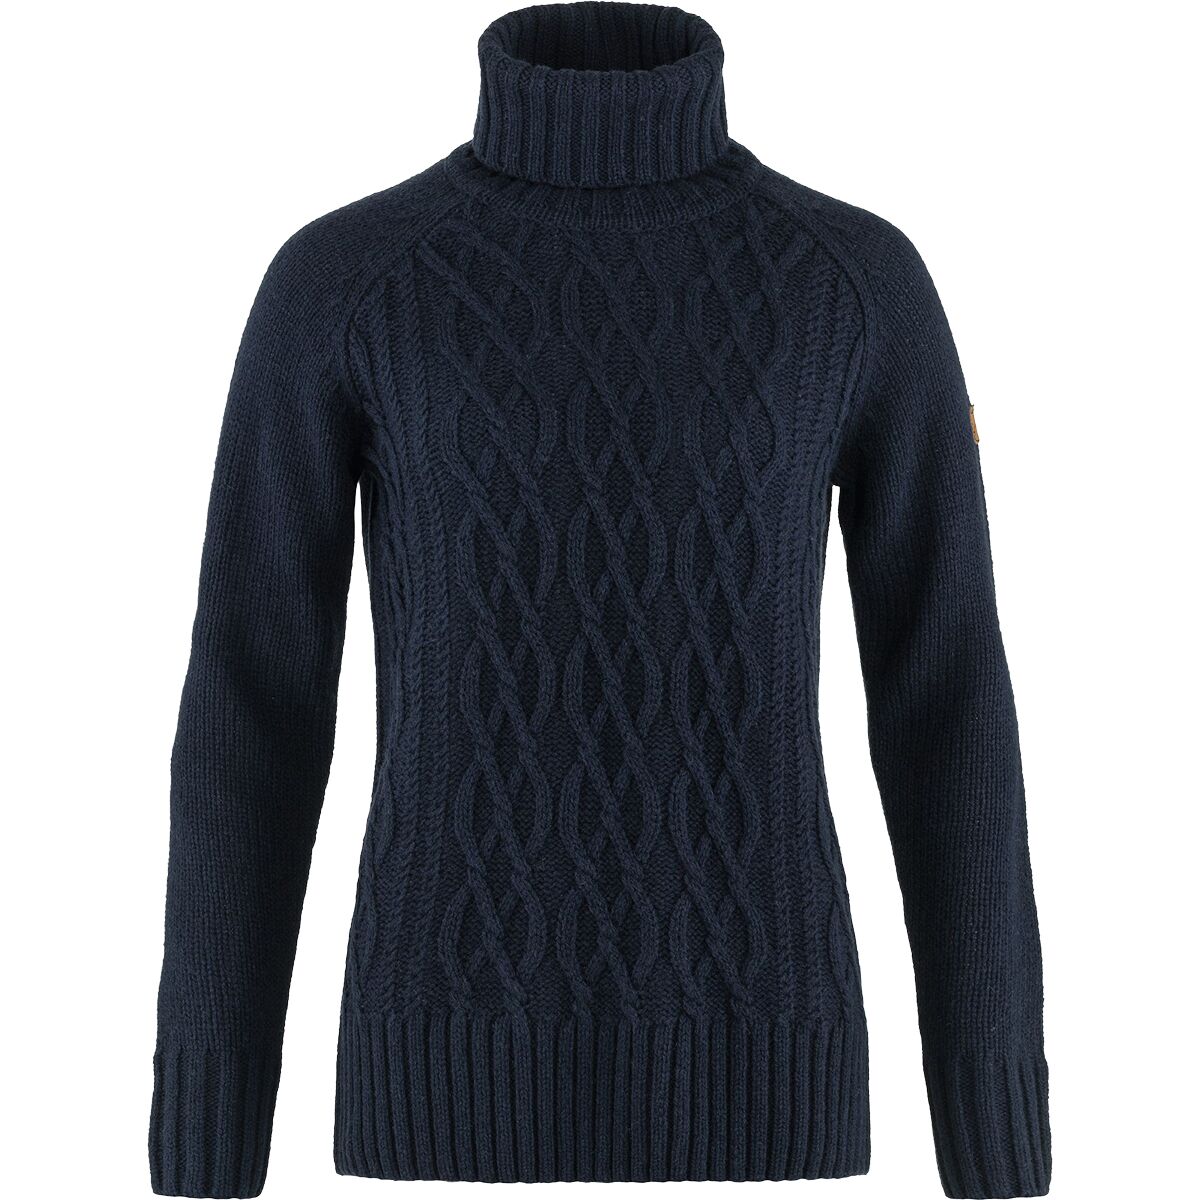 Fjallraven Ovik Cable Knit Roller Neck Sweater - Women's